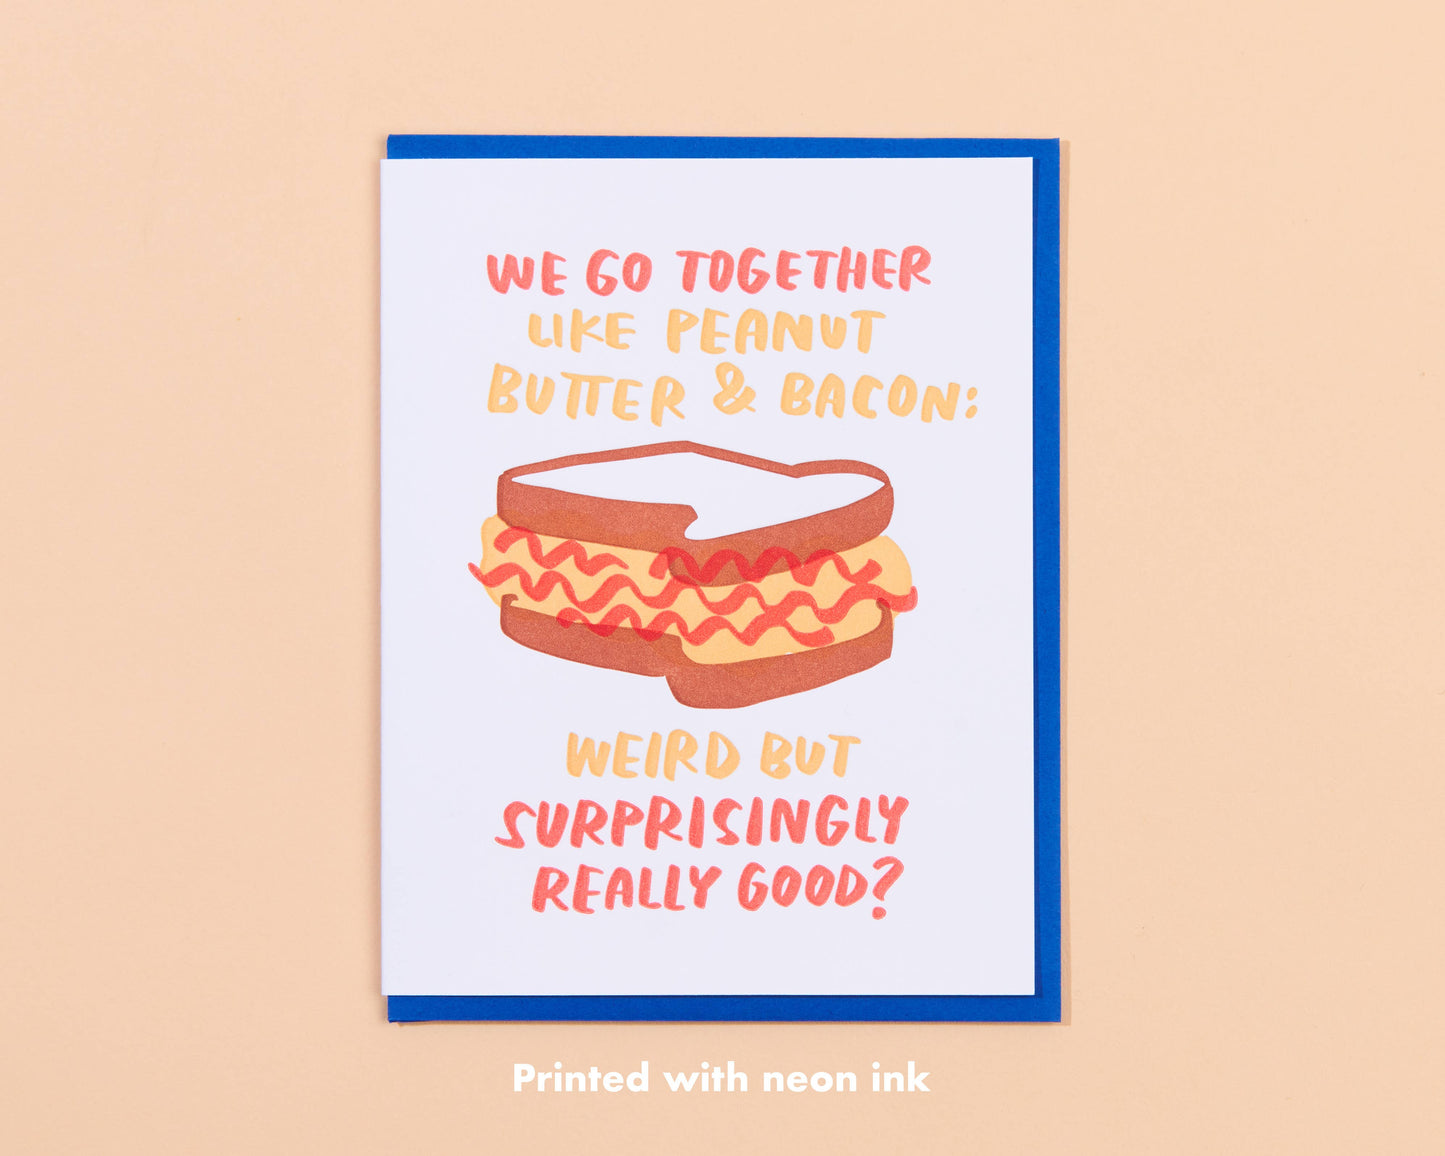 Greeting card that reads "We go together like peanut butter & bacon: weird but surprisingly good?" 